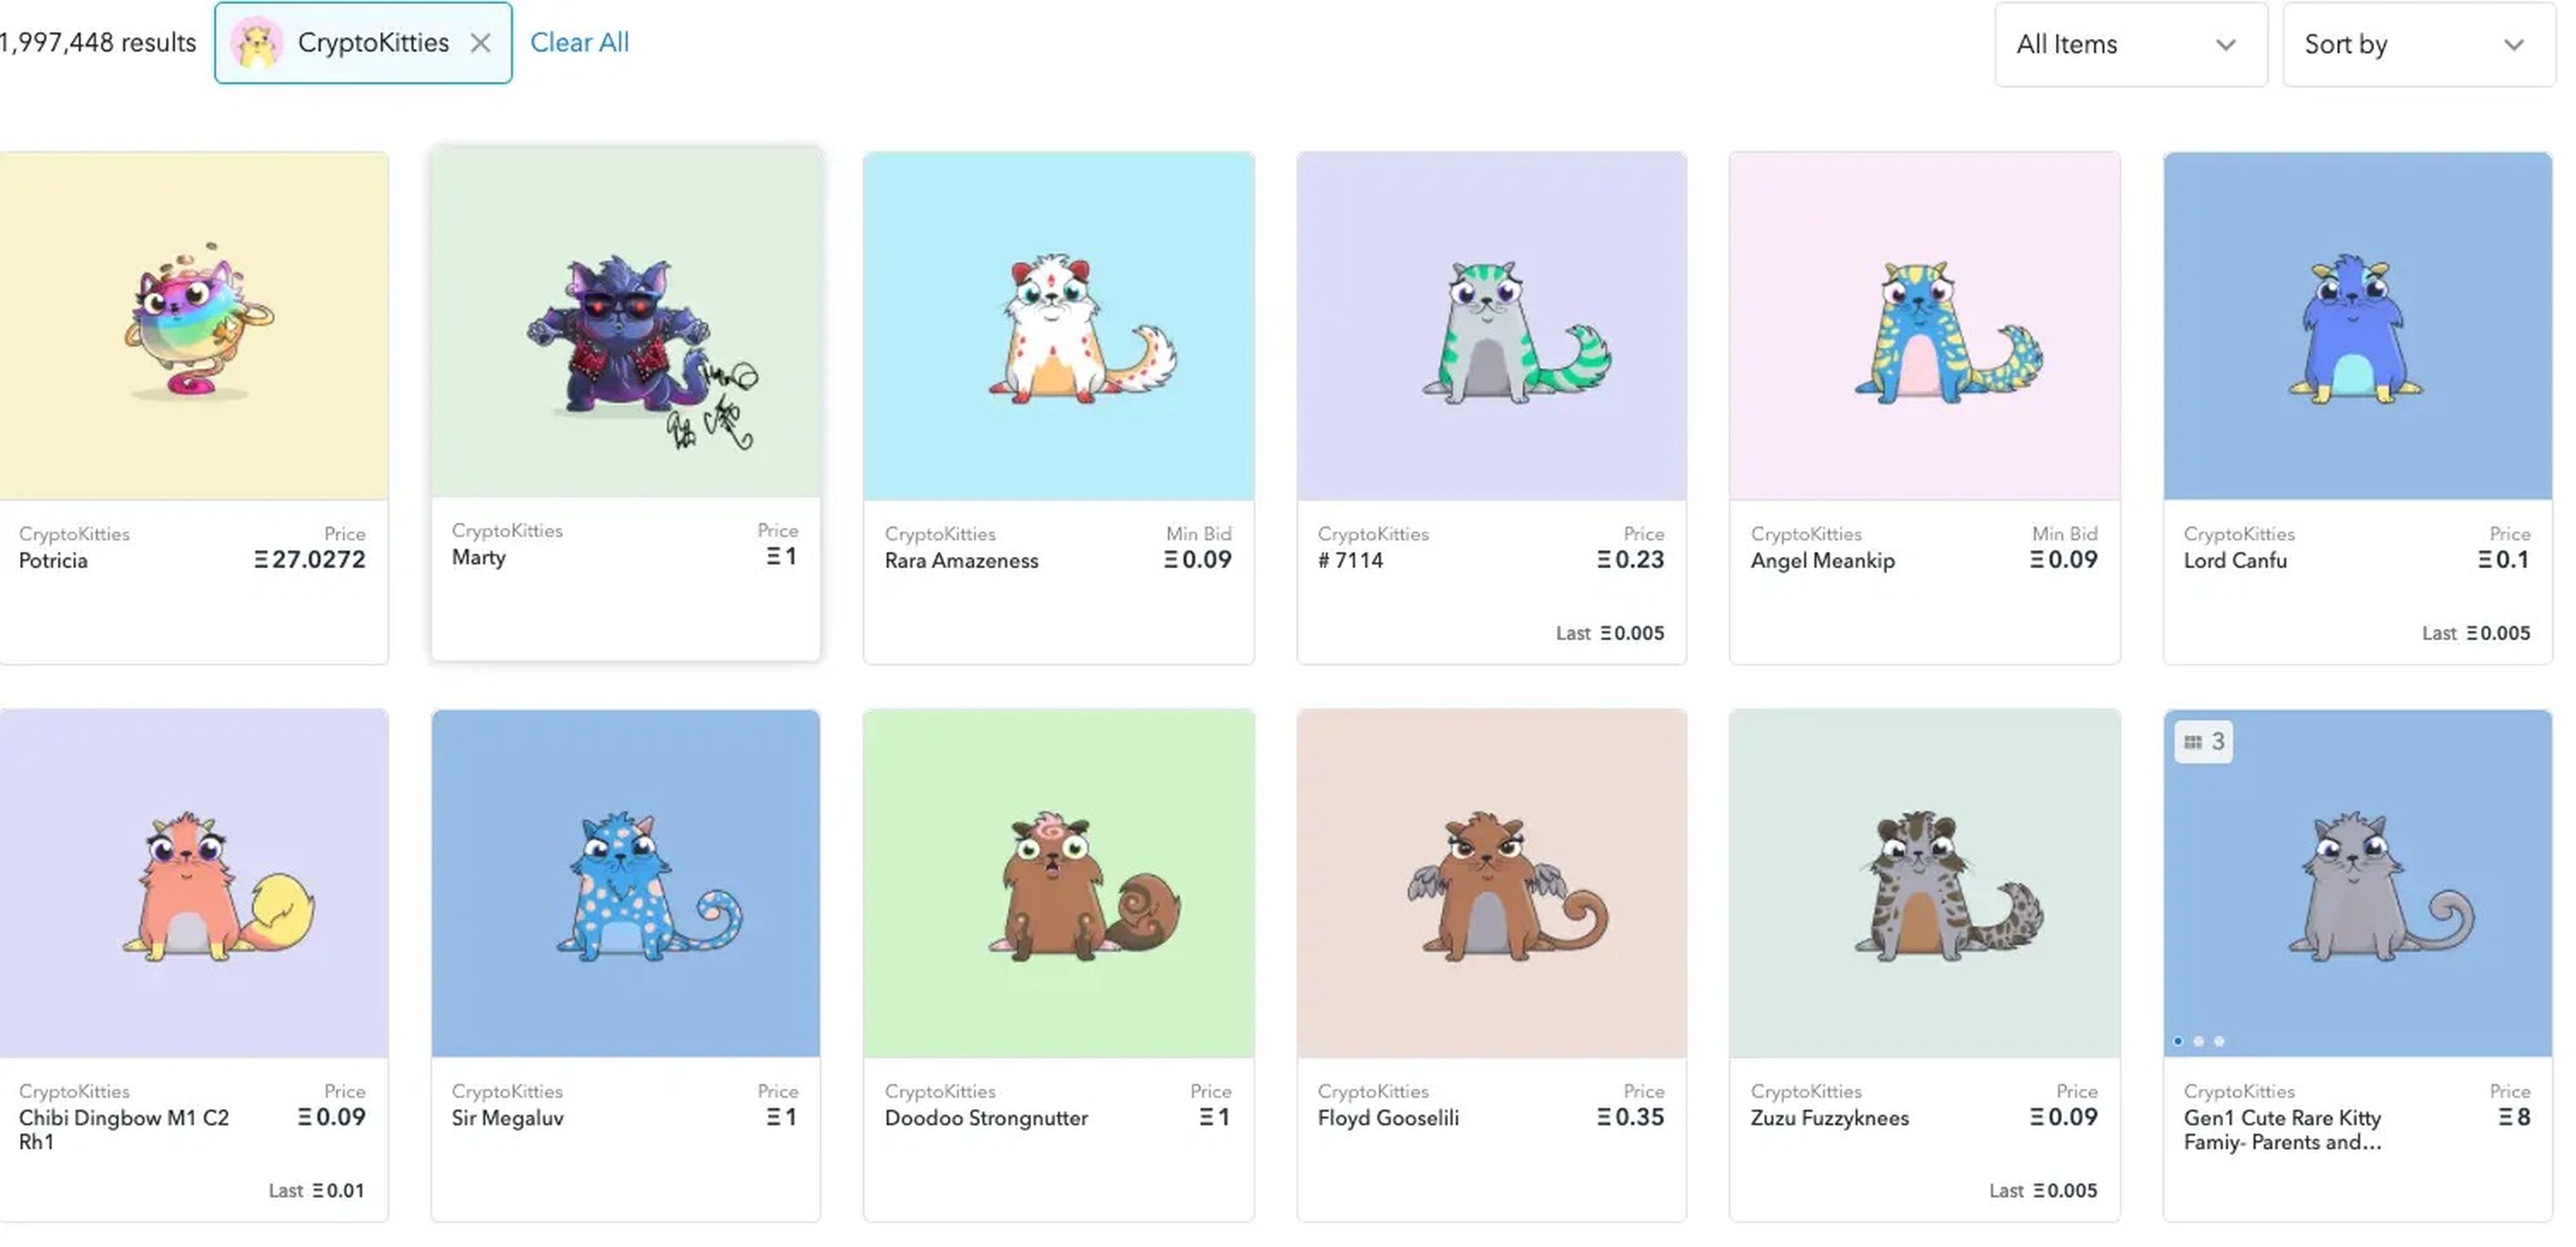 OpenSea sells a wide variety of NFTs, including CryptoKitties.